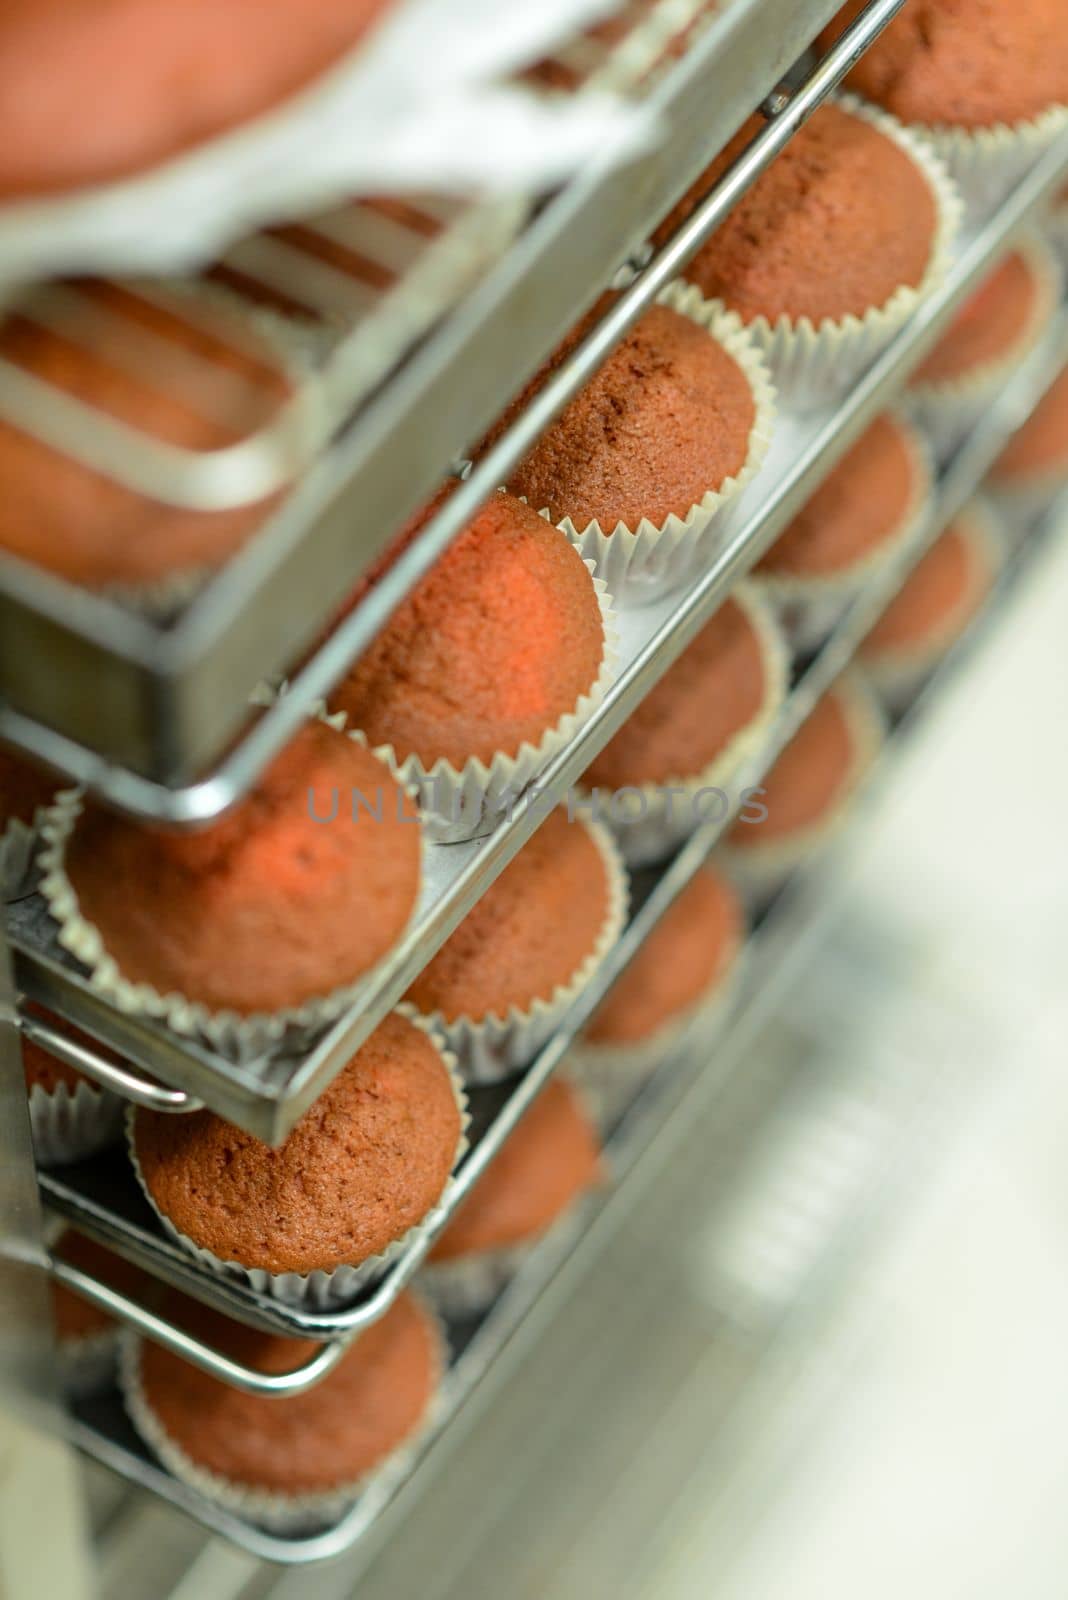 bakied group of undecorated red velvet cupcakes in bakery in a trolley by verbano